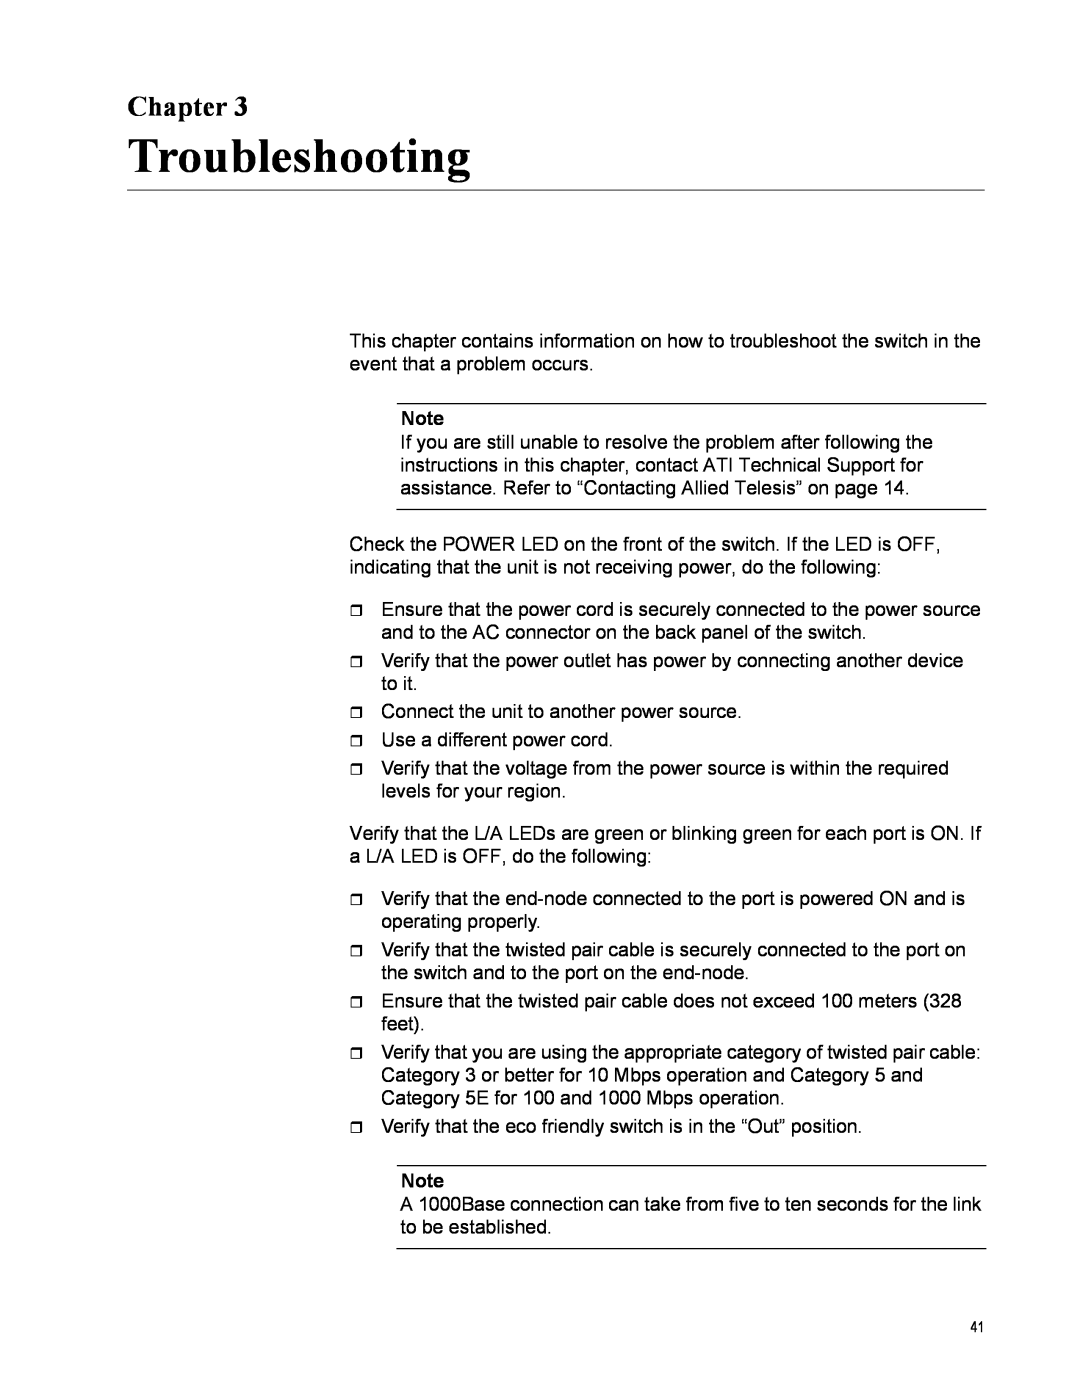 Allied Telesis AT-GS900/16 manual Troubleshooting, Chapter 